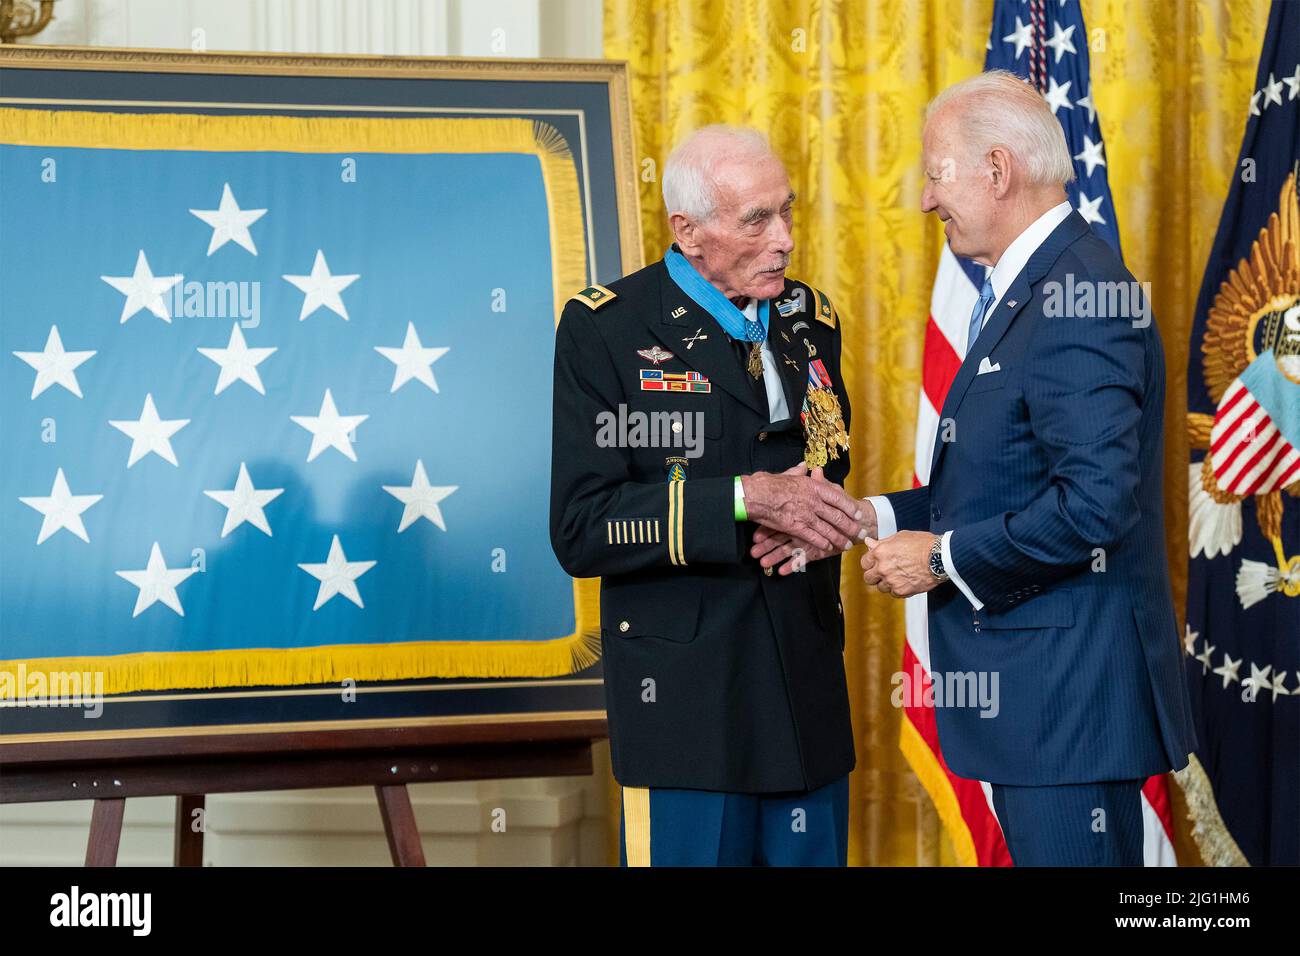 Washington, United States Of America. 05th July, 2022. Washington, United States of America. 05 July, 2022. U.S President Joe Biden, right, congratulates retired Maj. John Duffy after presenting him with the Medal of Honor for his actions during the Vietnam War at a ceremony in the East Room of the White House, July 5, 2022 in Washington, DC Credit: Adam Schultz/White House Photo/Alamy Live News Stock Photo